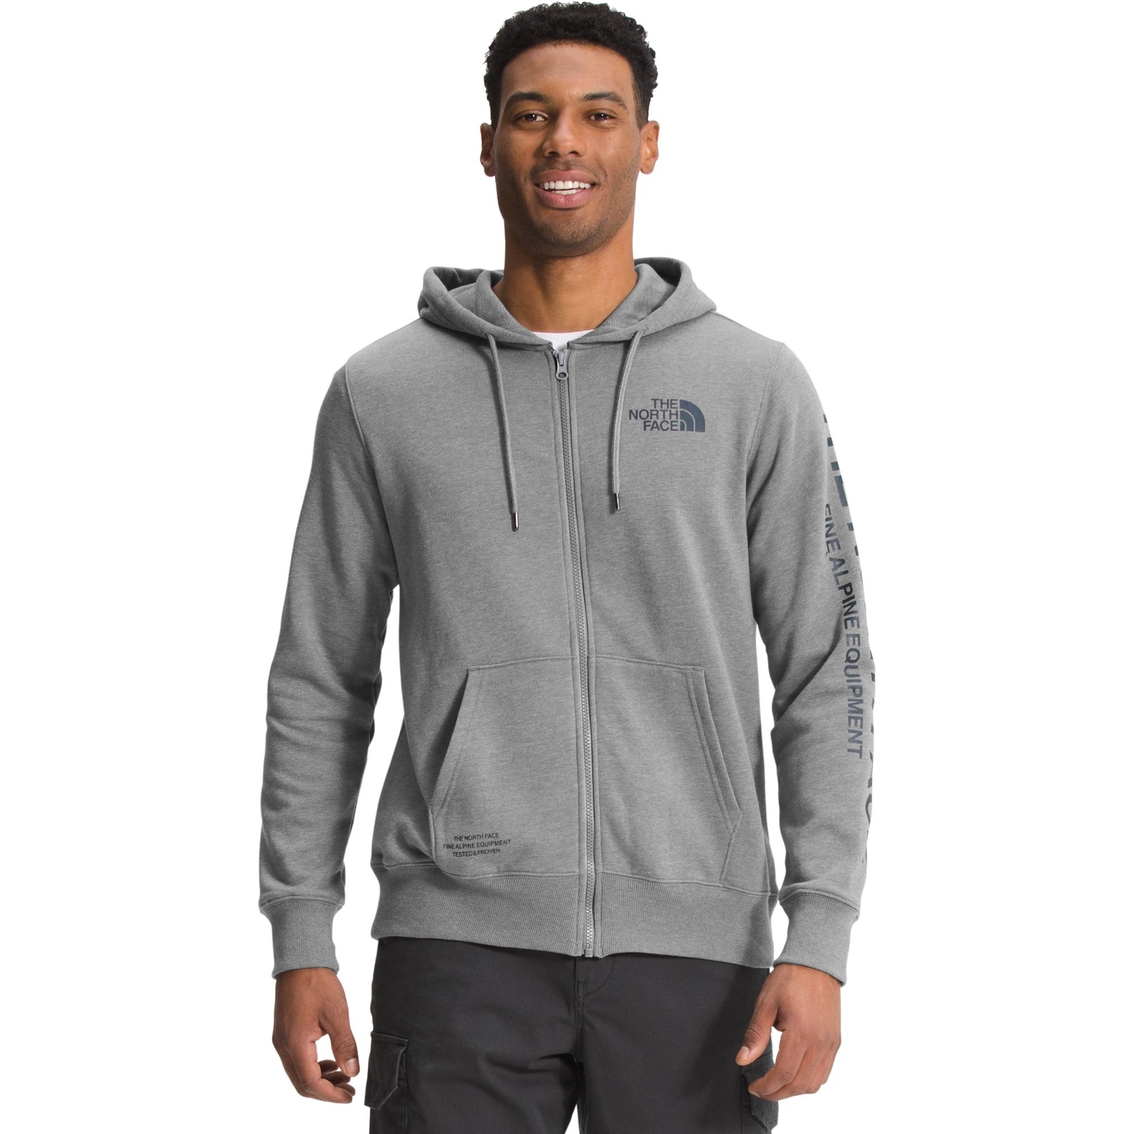 The North Face Brand Proud Full Zip Hoodie | Shirts | Clothing ...